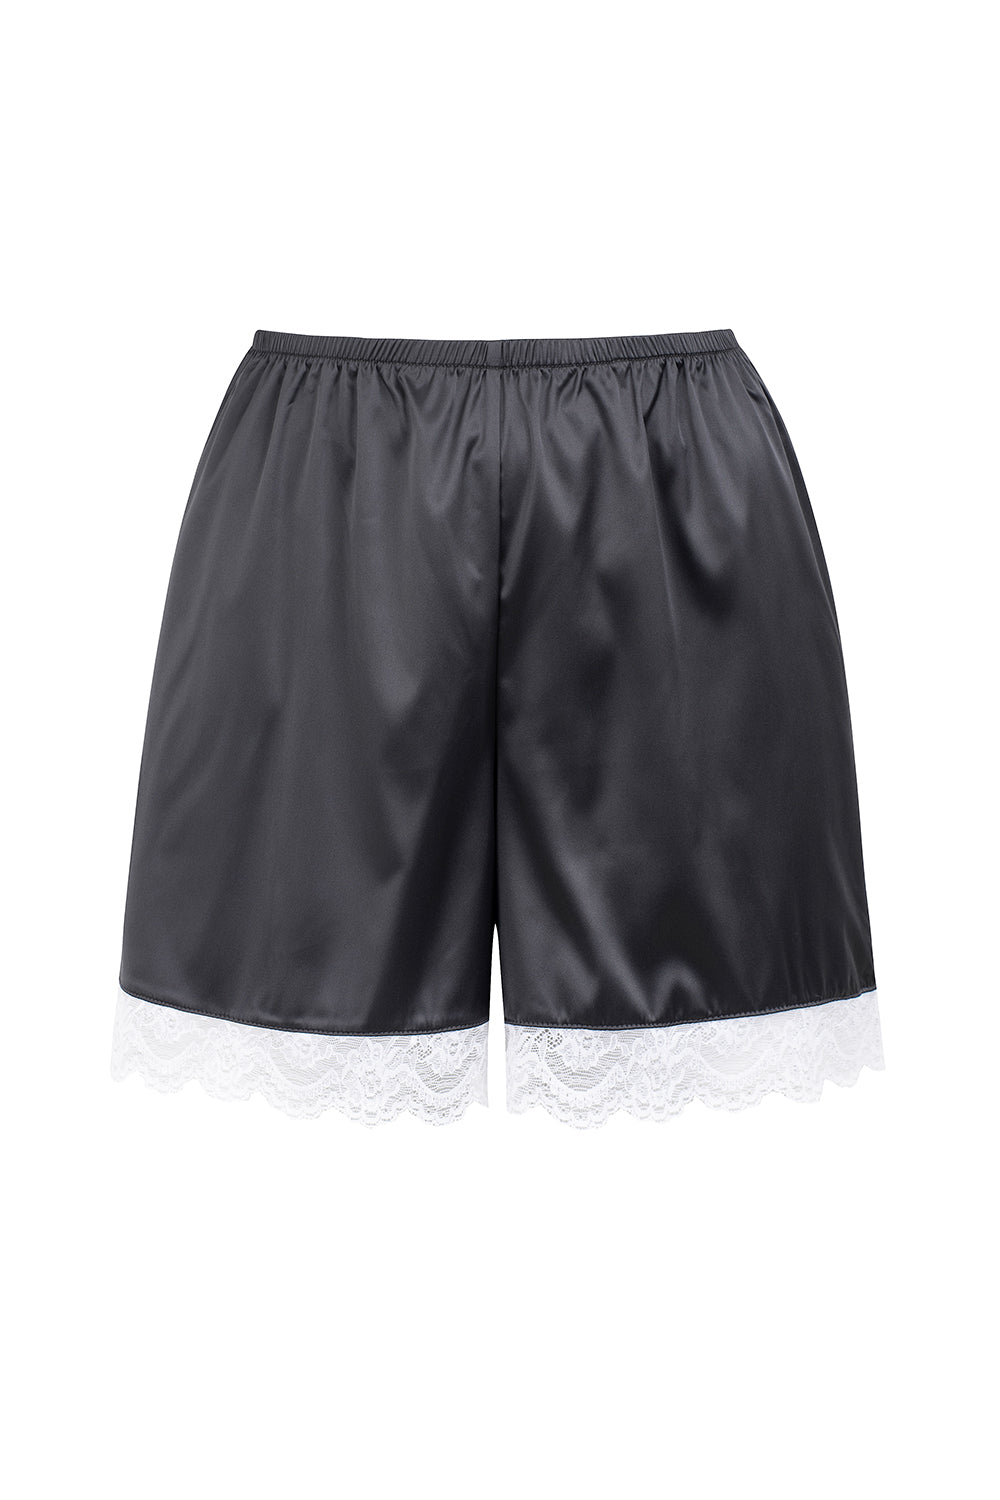 DARK GREY SATIN & LACE SHORTS (OUT OF STOCK)